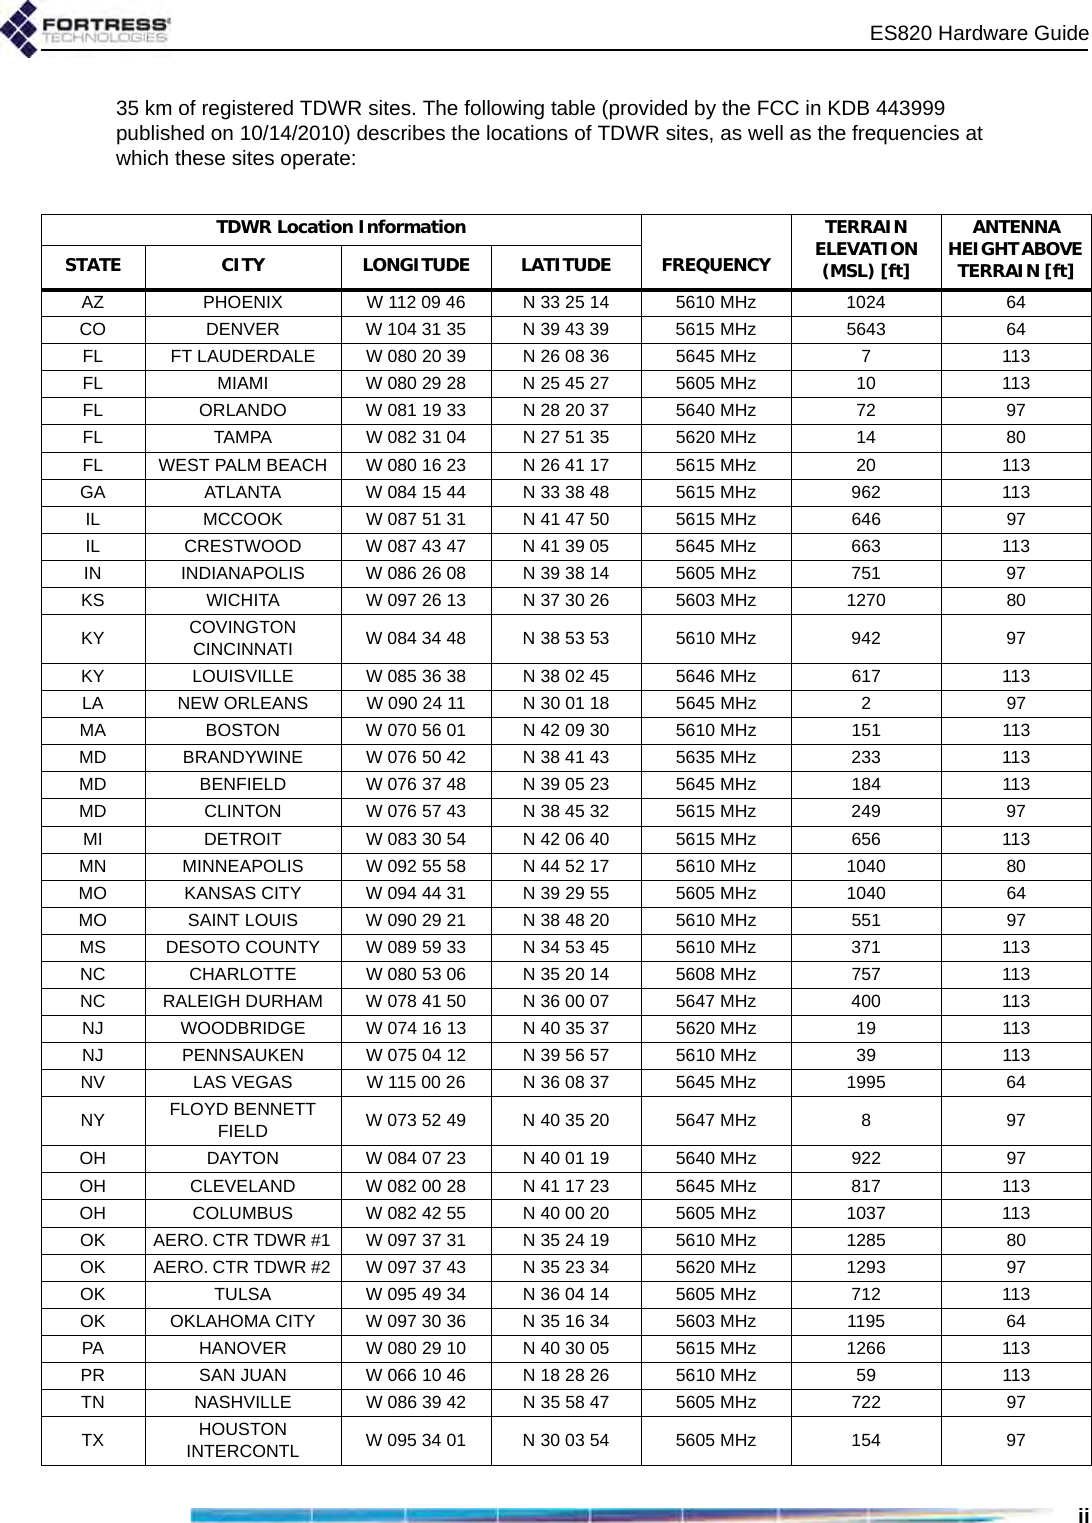 ES820 Hardware Guideii35 km of registered TDWR sites. The following table (provided by the FCC in KDB 443999 published on 10/14/2010) describes the locations of TDWR sites, as well as the frequencies at which these sites operate:TDWR Location Information TERRAIN ELEVATION (MSL) [ft] ANTENNA HEIGHT ABOVE TERRAIN [ft] STATE CITY LONGITUDE LATITUDE FREQUENCY AZ  PHOENIX  W 112 09 46  N 33 25 14  5610 MHz  1024  64 CO  DENVER  W 104 31 35  N 39 43 39  5615 MHz  5643  64 FL  FT LAUDERDALE  W 080 20 39  N 26 08 36  5645 MHz  7  113 FL  MIAMI  W 080 29 28  N 25 45 27  5605 MHz  10  113 FL  ORLANDO  W 081 19 33  N 28 20 37  5640 MHz  72  97 FL  TAMPA  W 082 31 04  N 27 51 35  5620 MHz  14  80 FL  WEST PALM BEACH  W 080 16 23  N 26 41 17  5615 MHz  20  113 GA  ATLANTA  W 084 15 44  N 33 38 48  5615 MHz  962  113 IL  MCCOOK  W 087 51 31  N 41 47 50  5615 MHz  646  97 IL  CRESTWOOD  W 087 43 47  N 41 39 05  5645 MHz  663  113 IN  INDIANAPOLIS  W 086 26 08  N 39 38 14  5605 MHz  751  97 KS  WICHITA  W 097 26 13  N 37 30 26  5603 MHz  1270  80 KY  COVINGTON CINCINNATI  W 084 34 48  N 38 53 53  5610 MHz  942  97 KY  LOUISVILLE  W 085 36 38  N 38 02 45  5646 MHz  617  113 LA  NEW ORLEANS  W 090 24 11  N 30 01 18  5645 MHz  2  97 MA  BOSTON  W 070 56 01  N 42 09 30  5610 MHz  151  113 MD  BRANDYWINE  W 076 50 42  N 38 41 43  5635 MHz  233  113 MD  BENFIELD  W 076 37 48  N 39 05 23  5645 MHz  184  113 MD  CLINTON  W 076 57 43  N 38 45 32  5615 MHz  249  97 MI  DETROIT  W 083 30 54  N 42 06 40  5615 MHz  656  113 MN  MINNEAPOLIS  W 092 55 58  N 44 52 17  5610 MHz  1040  80 MO  KANSAS CITY  W 094 44 31  N 39 29 55  5605 MHz  1040  64 MO  SAINT LOUIS  W 090 29 21  N 38 48 20  5610 MHz  551  97 MS  DESOTO COUNTY  W 089 59 33  N 34 53 45  5610 MHz  371  113 NC  CHARLOTTE  W 080 53 06  N 35 20 14  5608 MHz  757  113 NC  RALEIGH DURHAM  W 078 41 50  N 36 00 07  5647 MHz  400  113 NJ  WOODBRIDGE  W 074 16 13  N 40 35 37  5620 MHz  19  113 NJ  PENNSAUKEN  W 075 04 12  N 39 56 57  5610 MHz  39  113 NV  LAS VEGAS  W 115 00 26  N 36 08 37  5645 MHz  1995  64 NY  FLOYD BENNETT FIELD  W 073 52 49  N 40 35 20  5647 MHz  8  97 OH  DAYTON  W 084 07 23  N 40 01 19  5640 MHz  922  97 OH  CLEVELAND  W 082 00 28  N 41 17 23  5645 MHz  817  113 OH  COLUMBUS  W 082 42 55  N 40 00 20  5605 MHz  1037  113 OK  AERO. CTR TDWR #1  W 097 37 31  N 35 24 19  5610 MHz  1285  80 OK  AERO. CTR TDWR #2  W 097 37 43  N 35 23 34  5620 MHz  1293  97 OK  TULSA  W 095 49 34  N 36 04 14  5605 MHz  712  113 OK  OKLAHOMA CITY  W 097 30 36  N 35 16 34  5603 MHz  1195  64 PA  HANOVER  W 080 29 10  N 40 30 05  5615 MHz  1266  113 PR  SAN JUAN  W 066 10 46  N 18 28 26  5610 MHz  59  113 TN  NASHVILLE  W 086 39 42  N 35 58 47  5605 MHz  722  97 TX  HOUSTON INTERCONTL  W 095 34 01  N 30 03 54  5605 MHz  154  97 